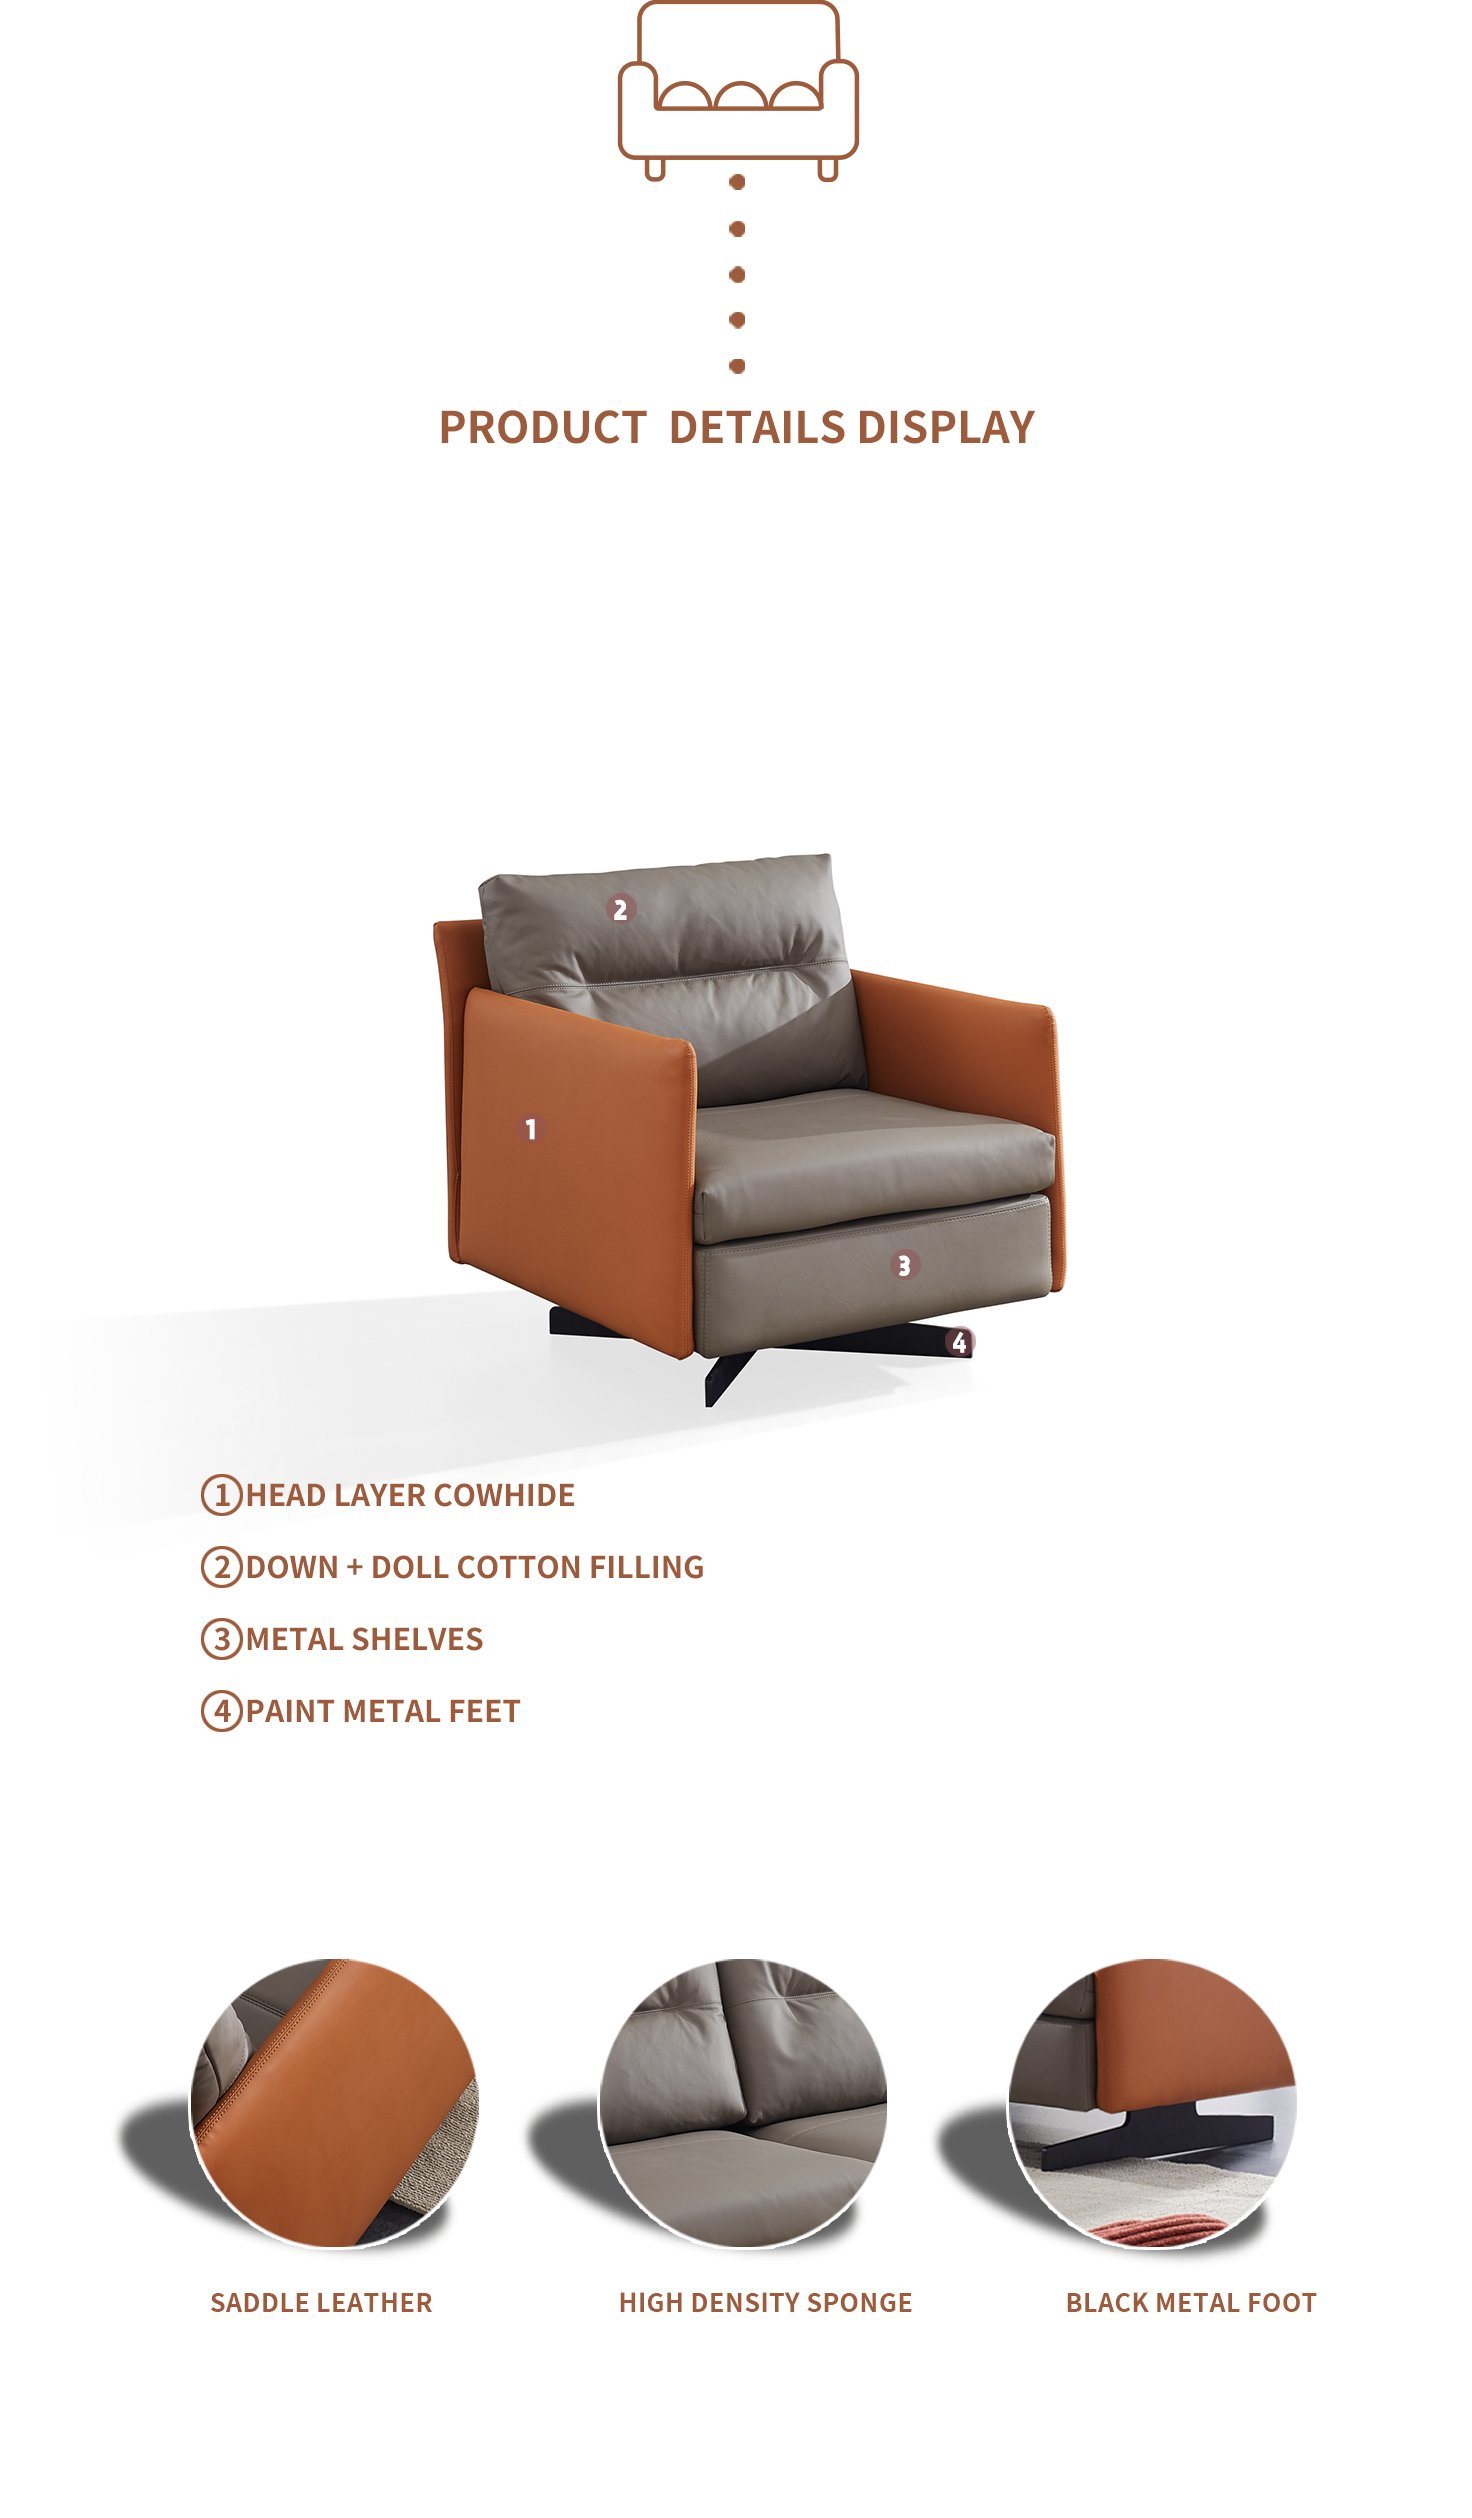 Single Seater High Quality Nappa Leather Sofa Home Hotel Office Living Room Furniture